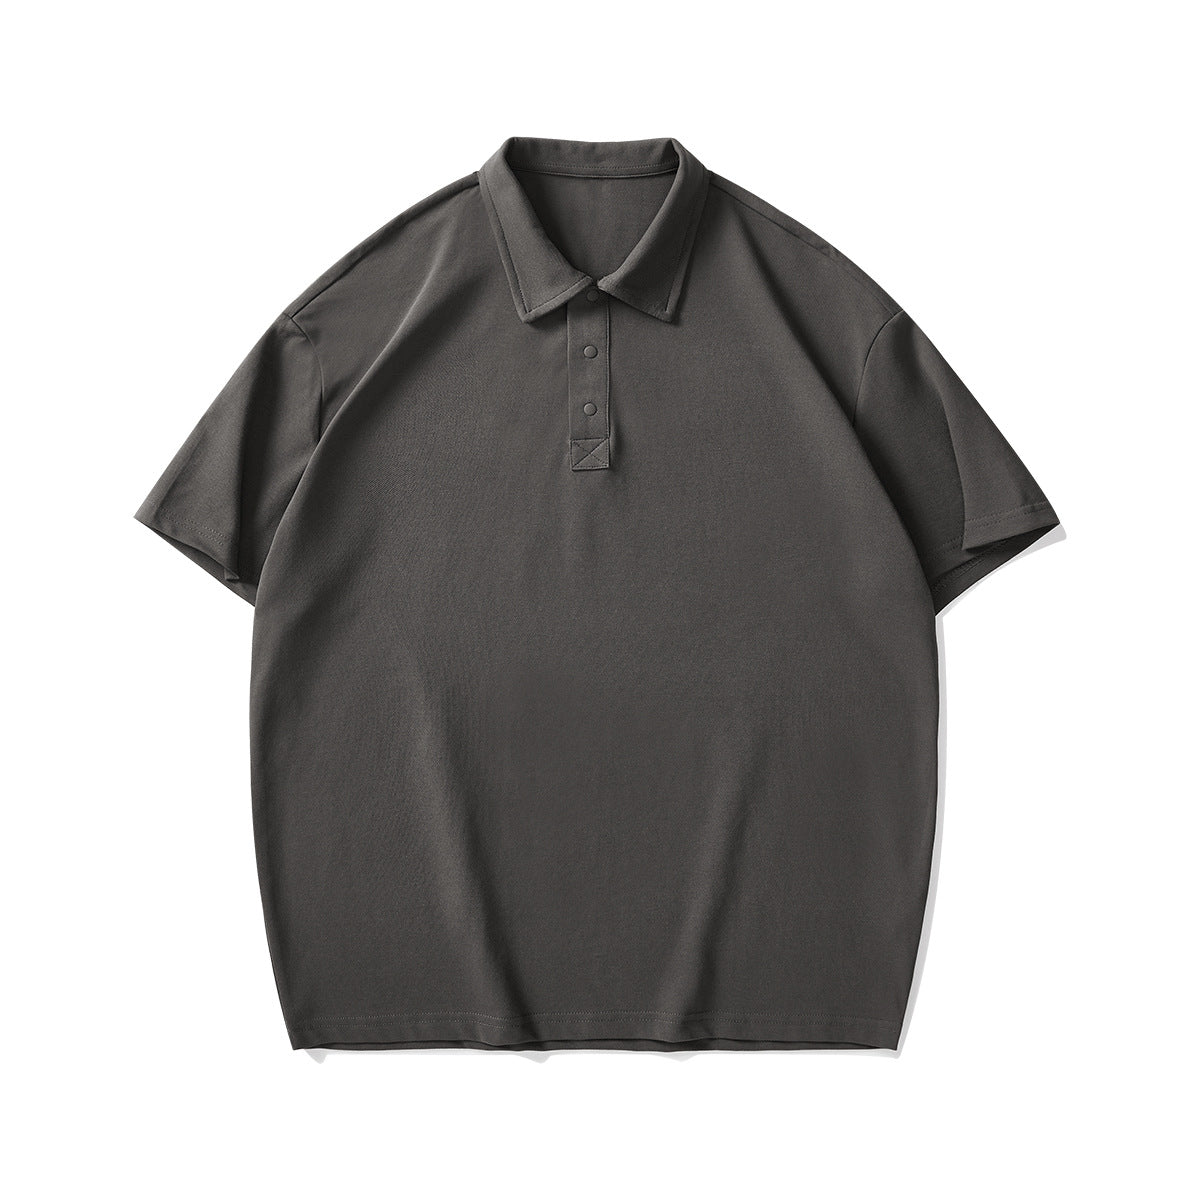 210g Pearl Cotton Basic Solid Color Polo Shirt